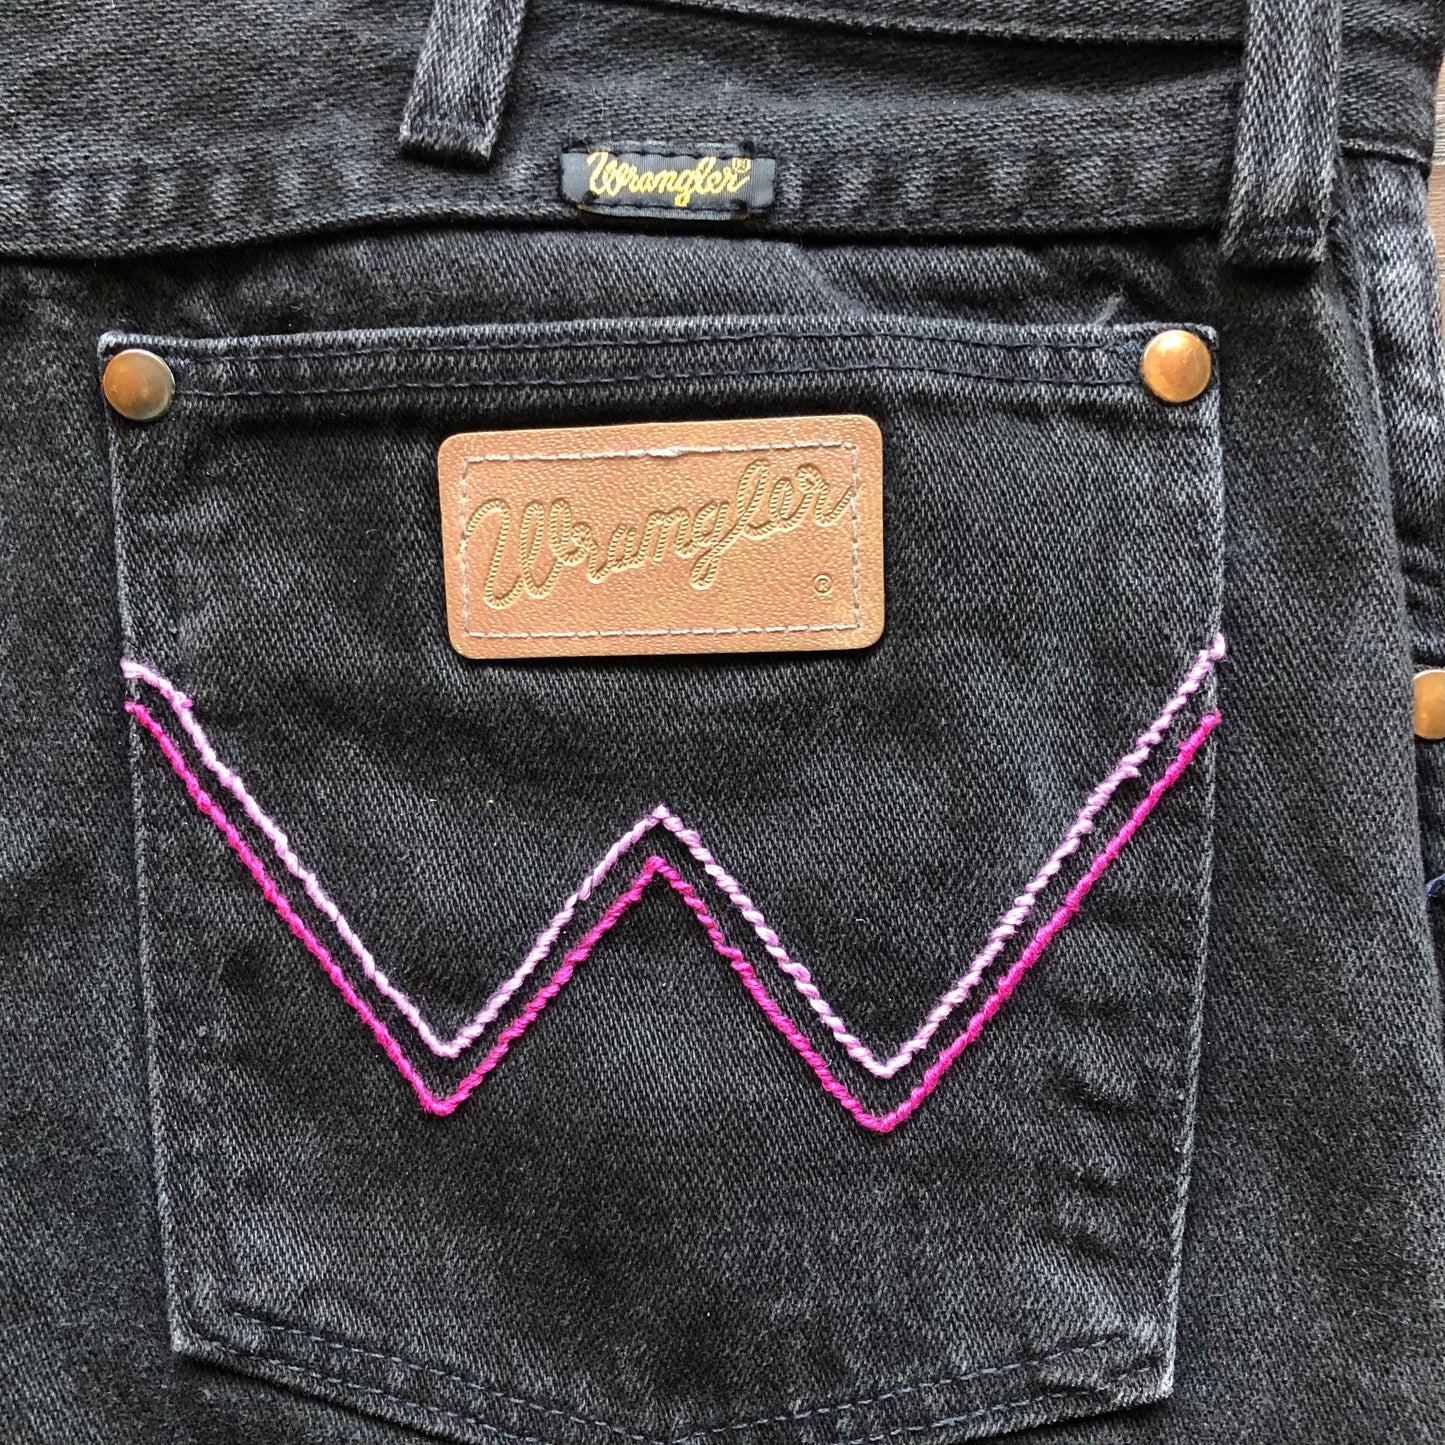 Vintage Western Black Wrangler Jeans with Hand Embroidered “W’s”